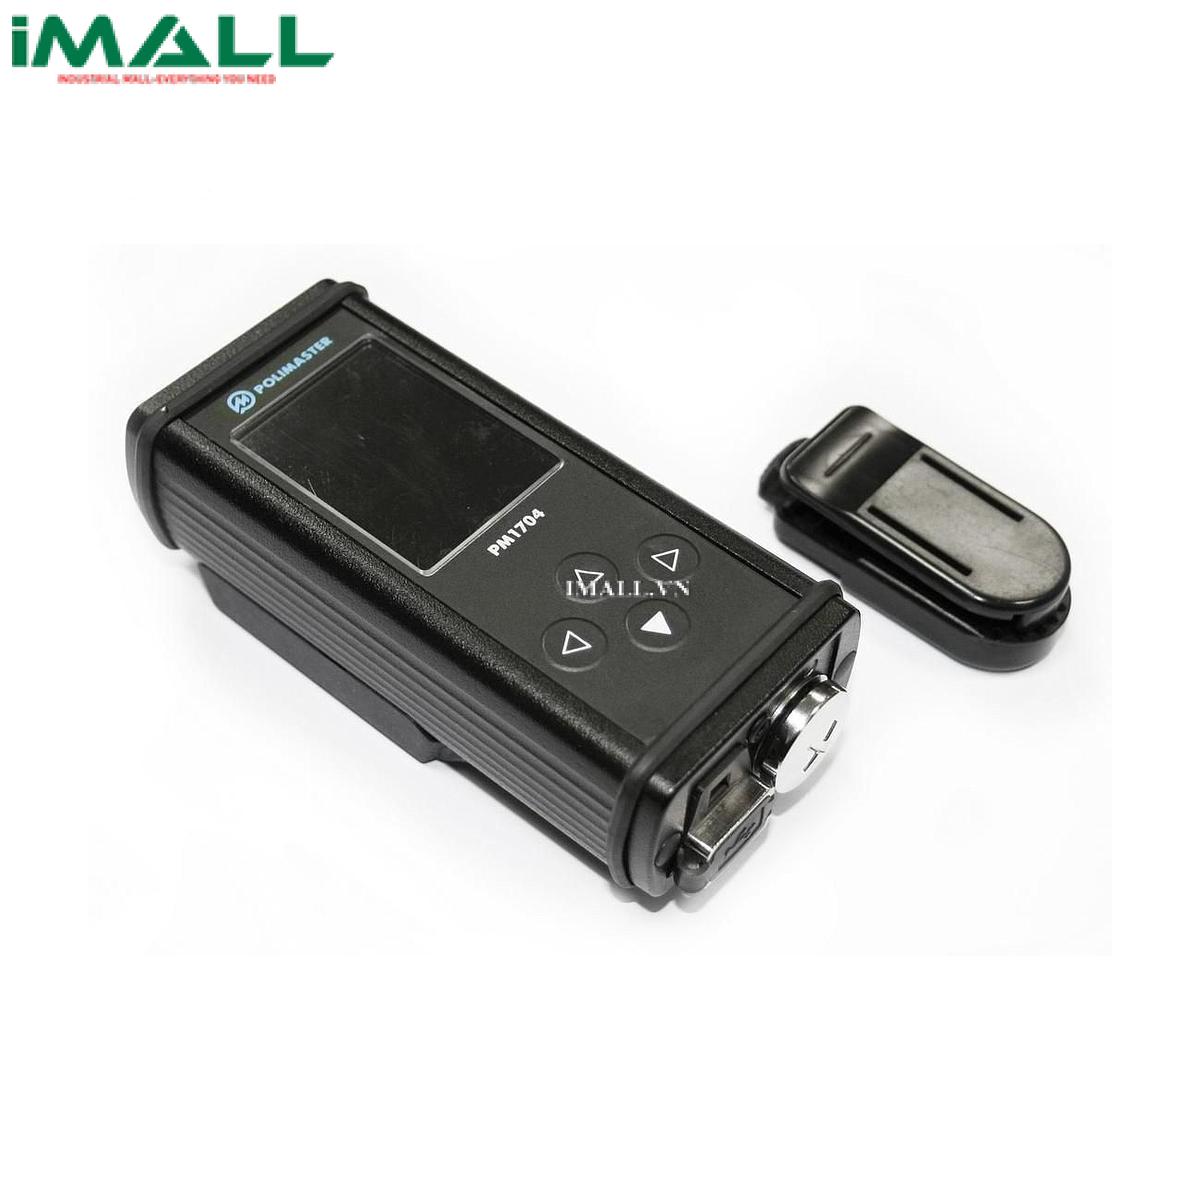 Spectroscopic Personal Radiation Detectors Polimaster PM1704GN0